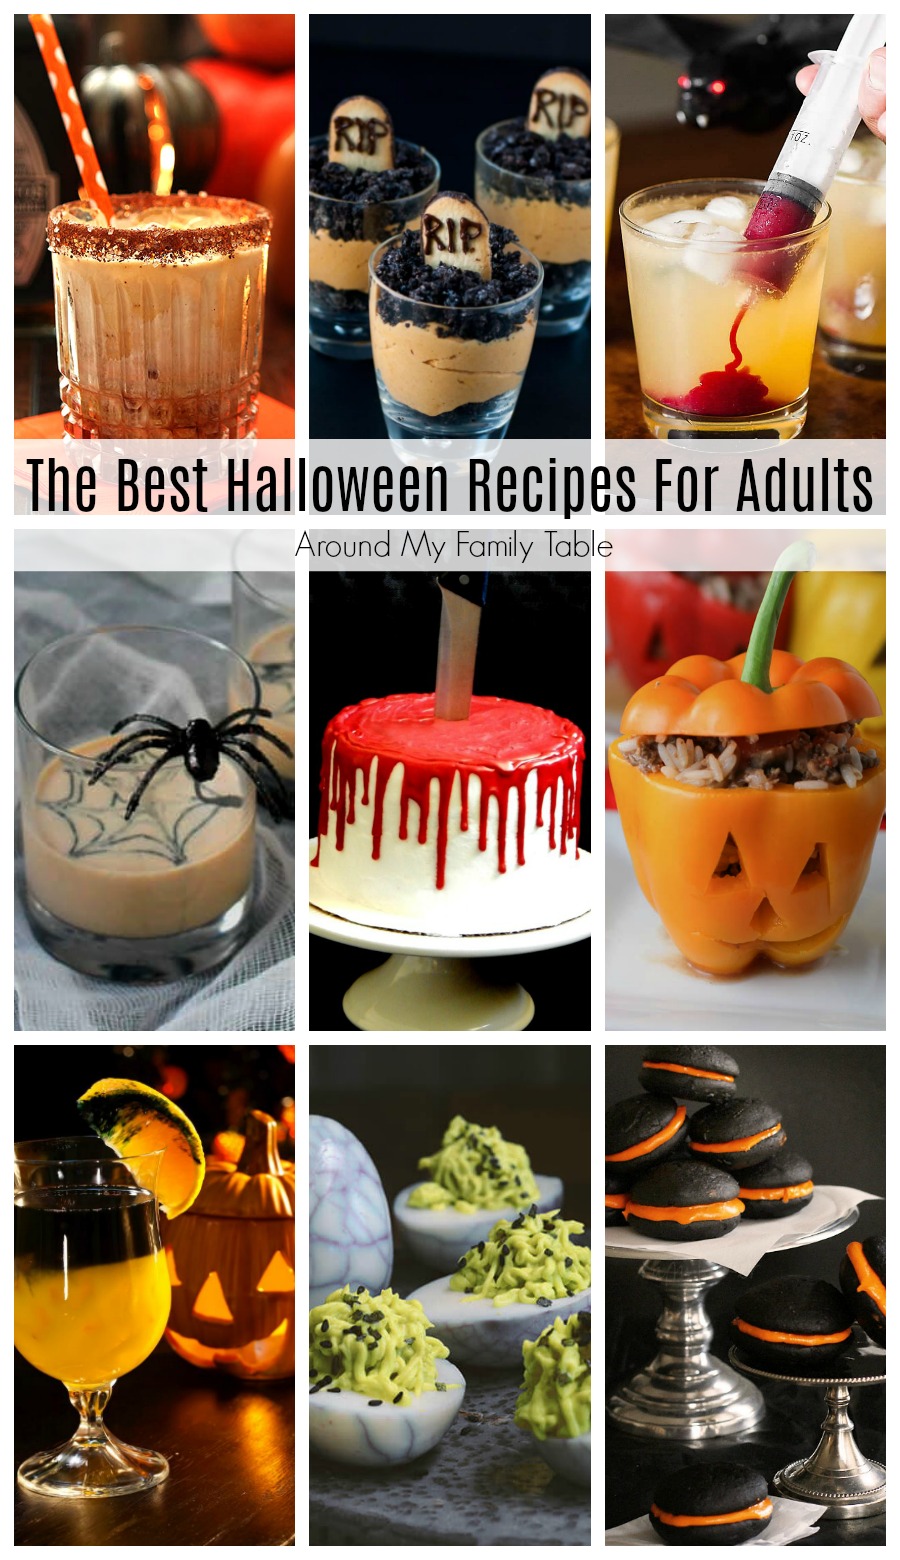 Who says Halloween has to be about the kiddos? You'll enjoy this collection of The Best Halloween Recipes for Adults. #halloween #halloweenrecipes  via @slingmama